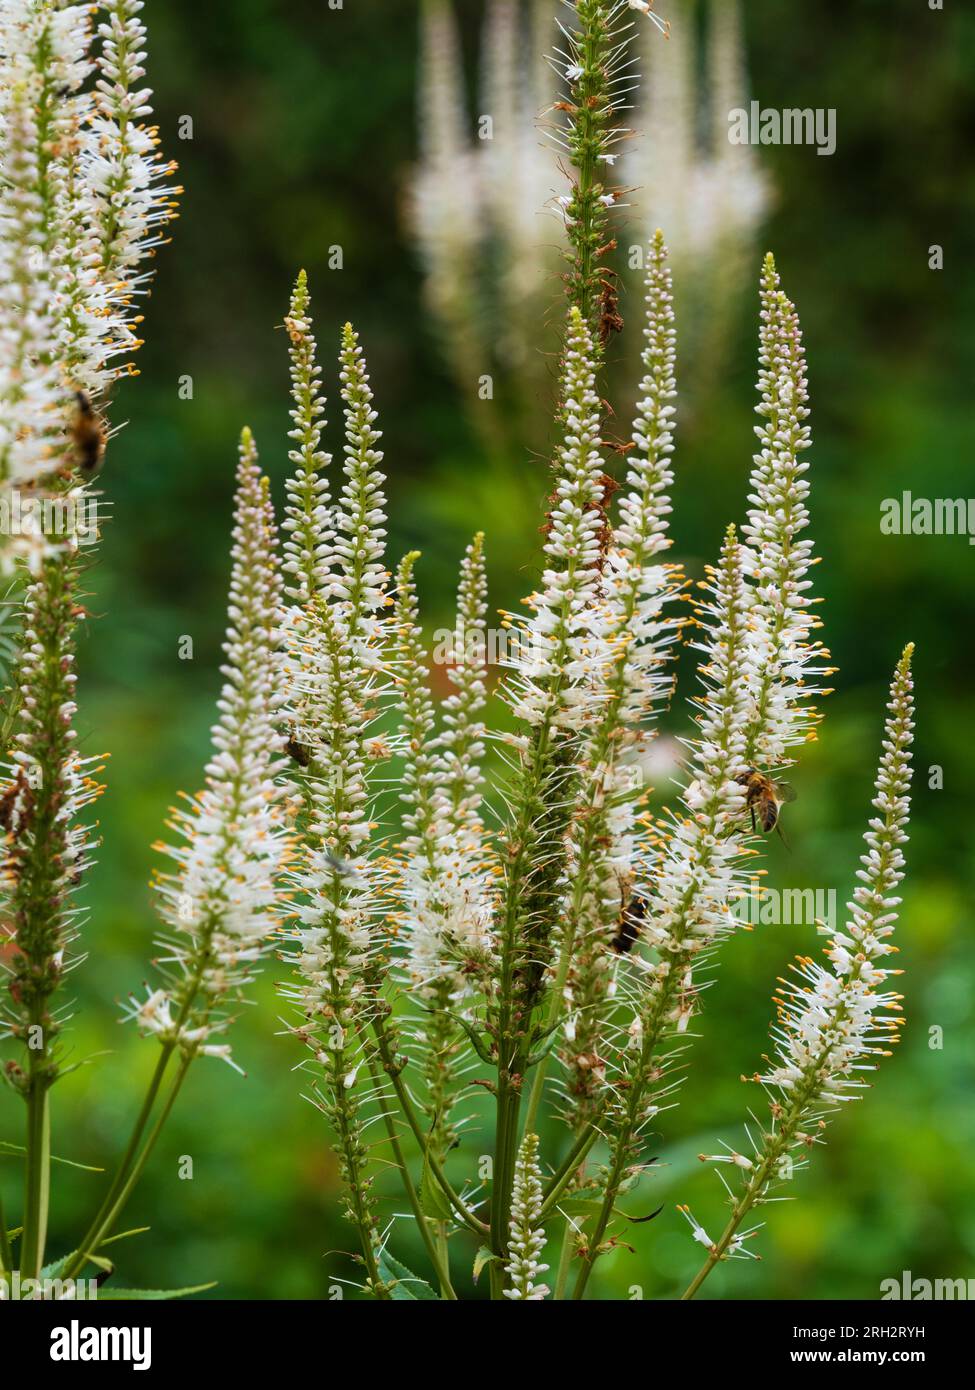 Small white flowers in the spikes of the summer bloomng  hardy perennial Culver's root, Veronicastrum virginicum 'Album' Stock Photo